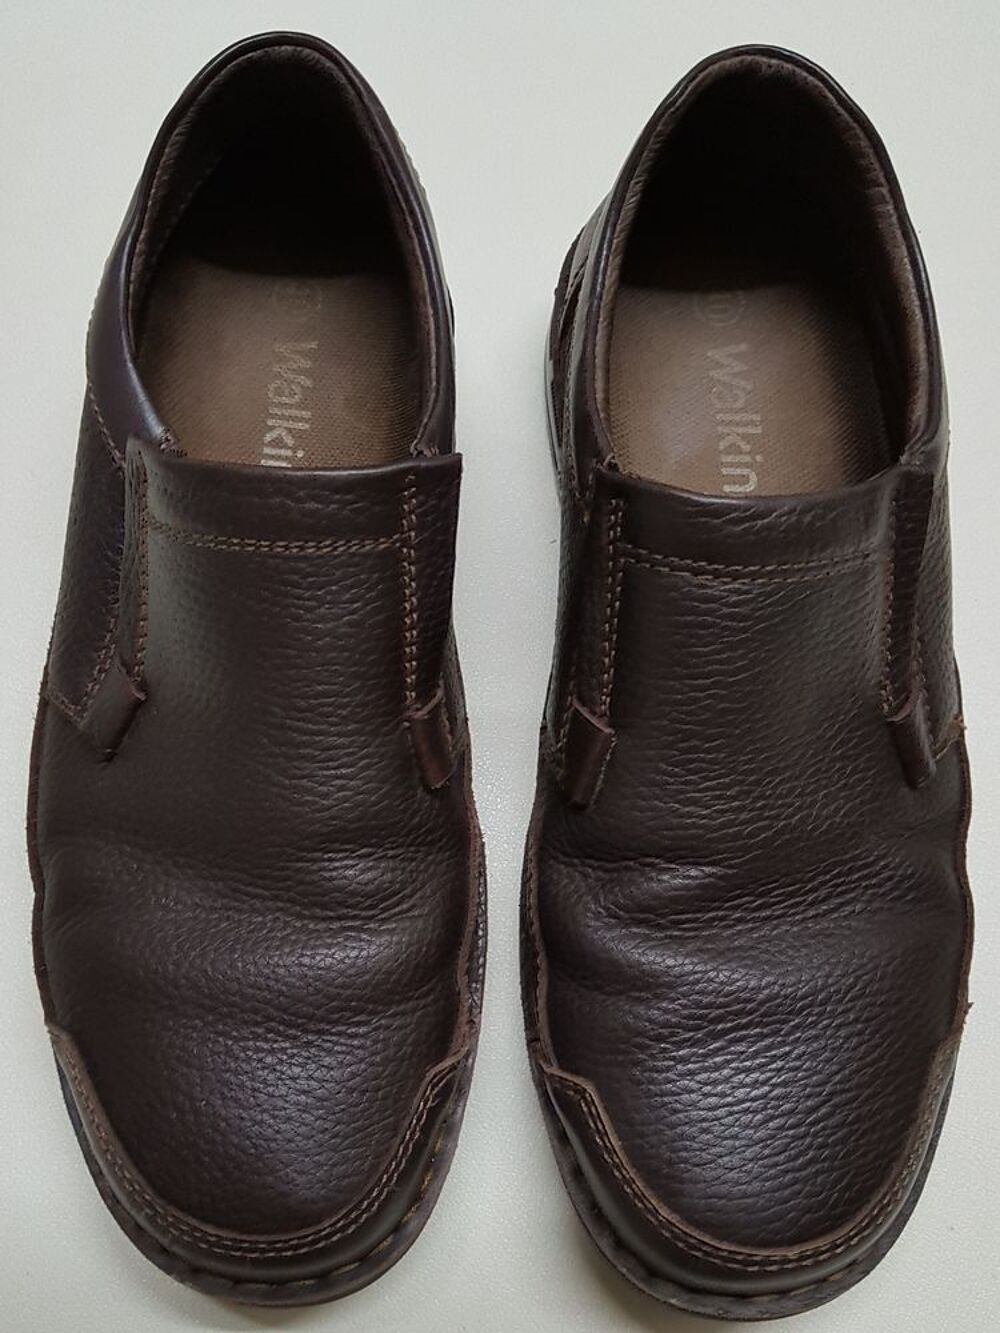 Chaussures homme cuir marron Chaussures